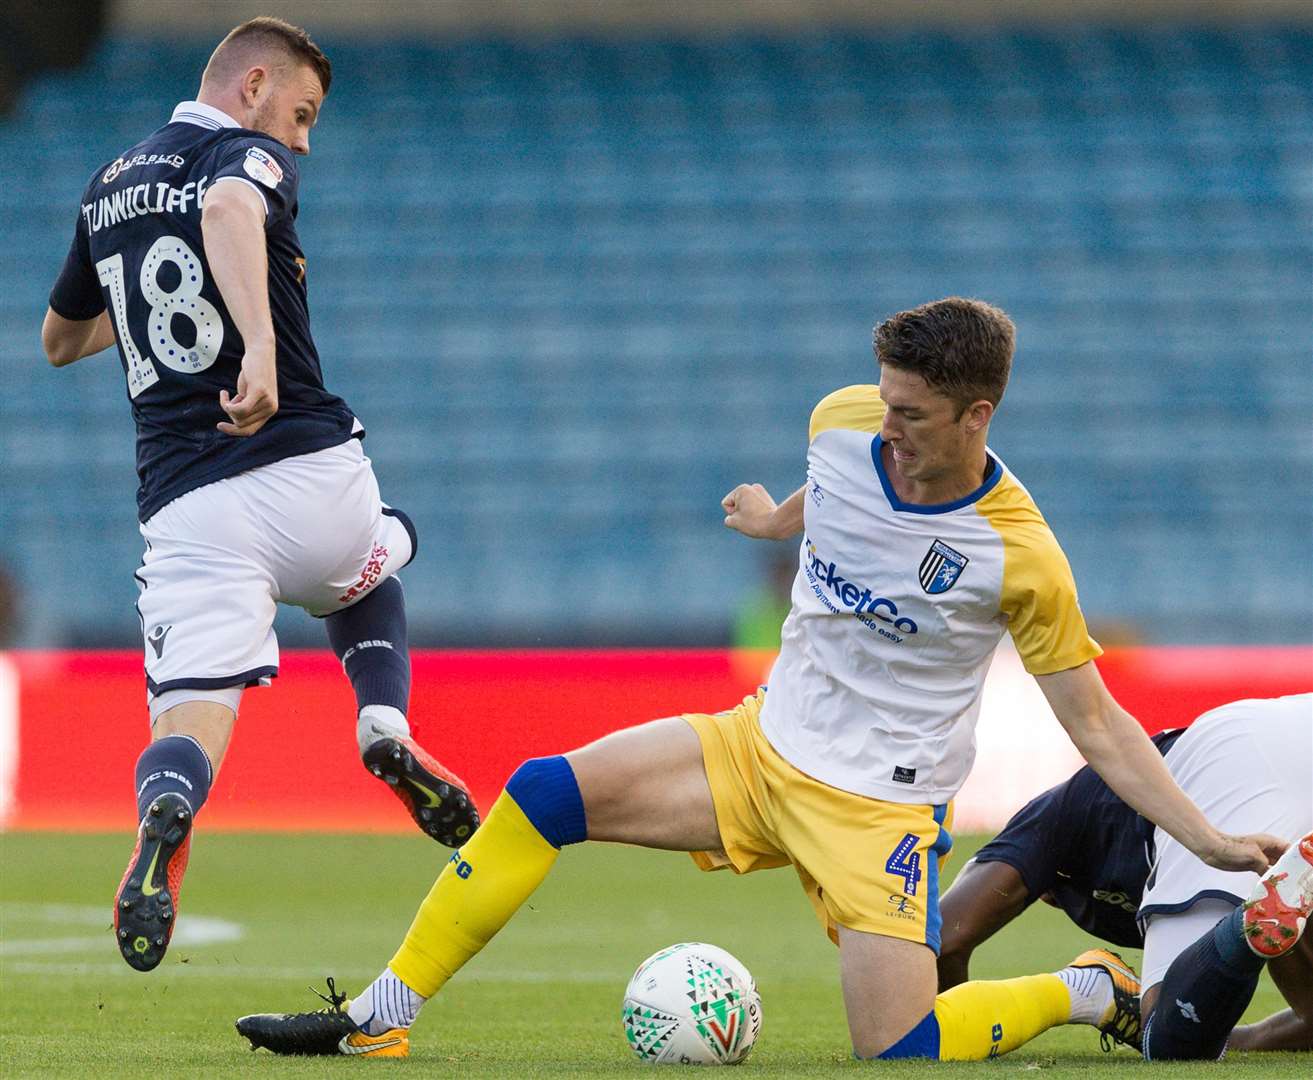 Alex Lacey wins the ball under pressure from Millwall's Ryan Tunnicliffe Picture: Ady Kerry